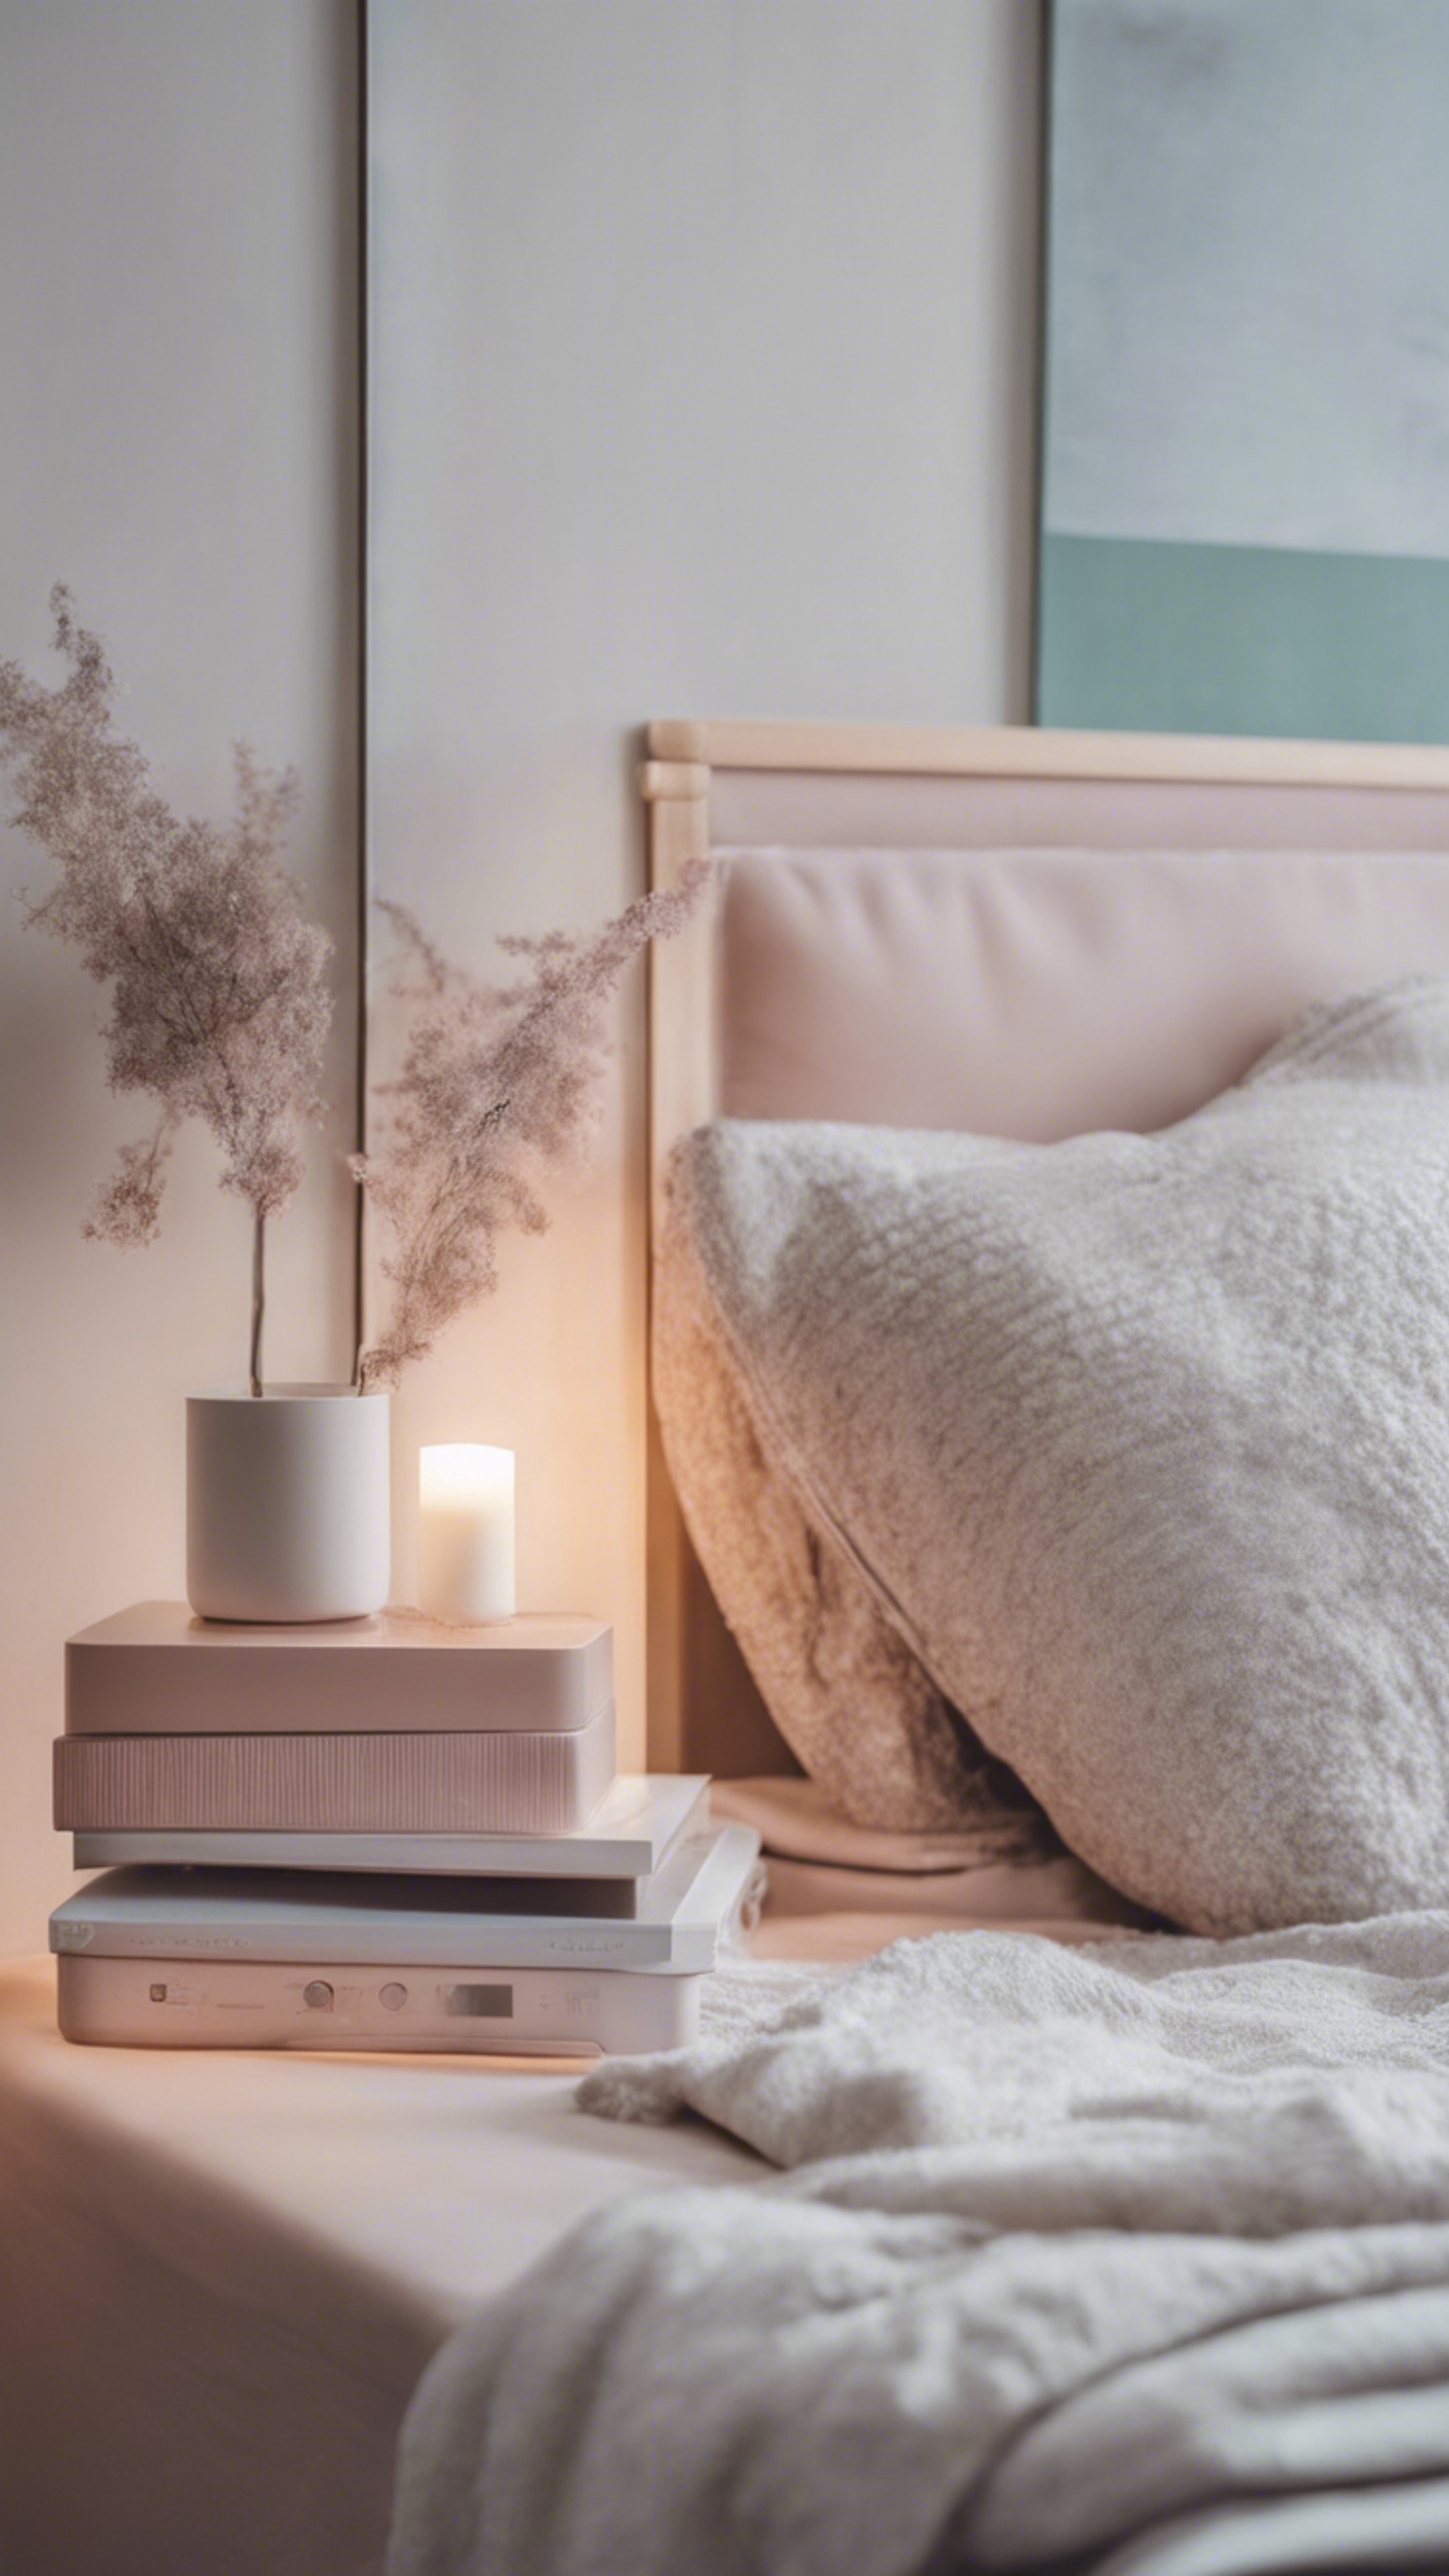 A modern minimalist bedroom in pastel hues with cozy blankets and a stylish bedside table. Fond d'écran[e12df14007a0419d89d8]